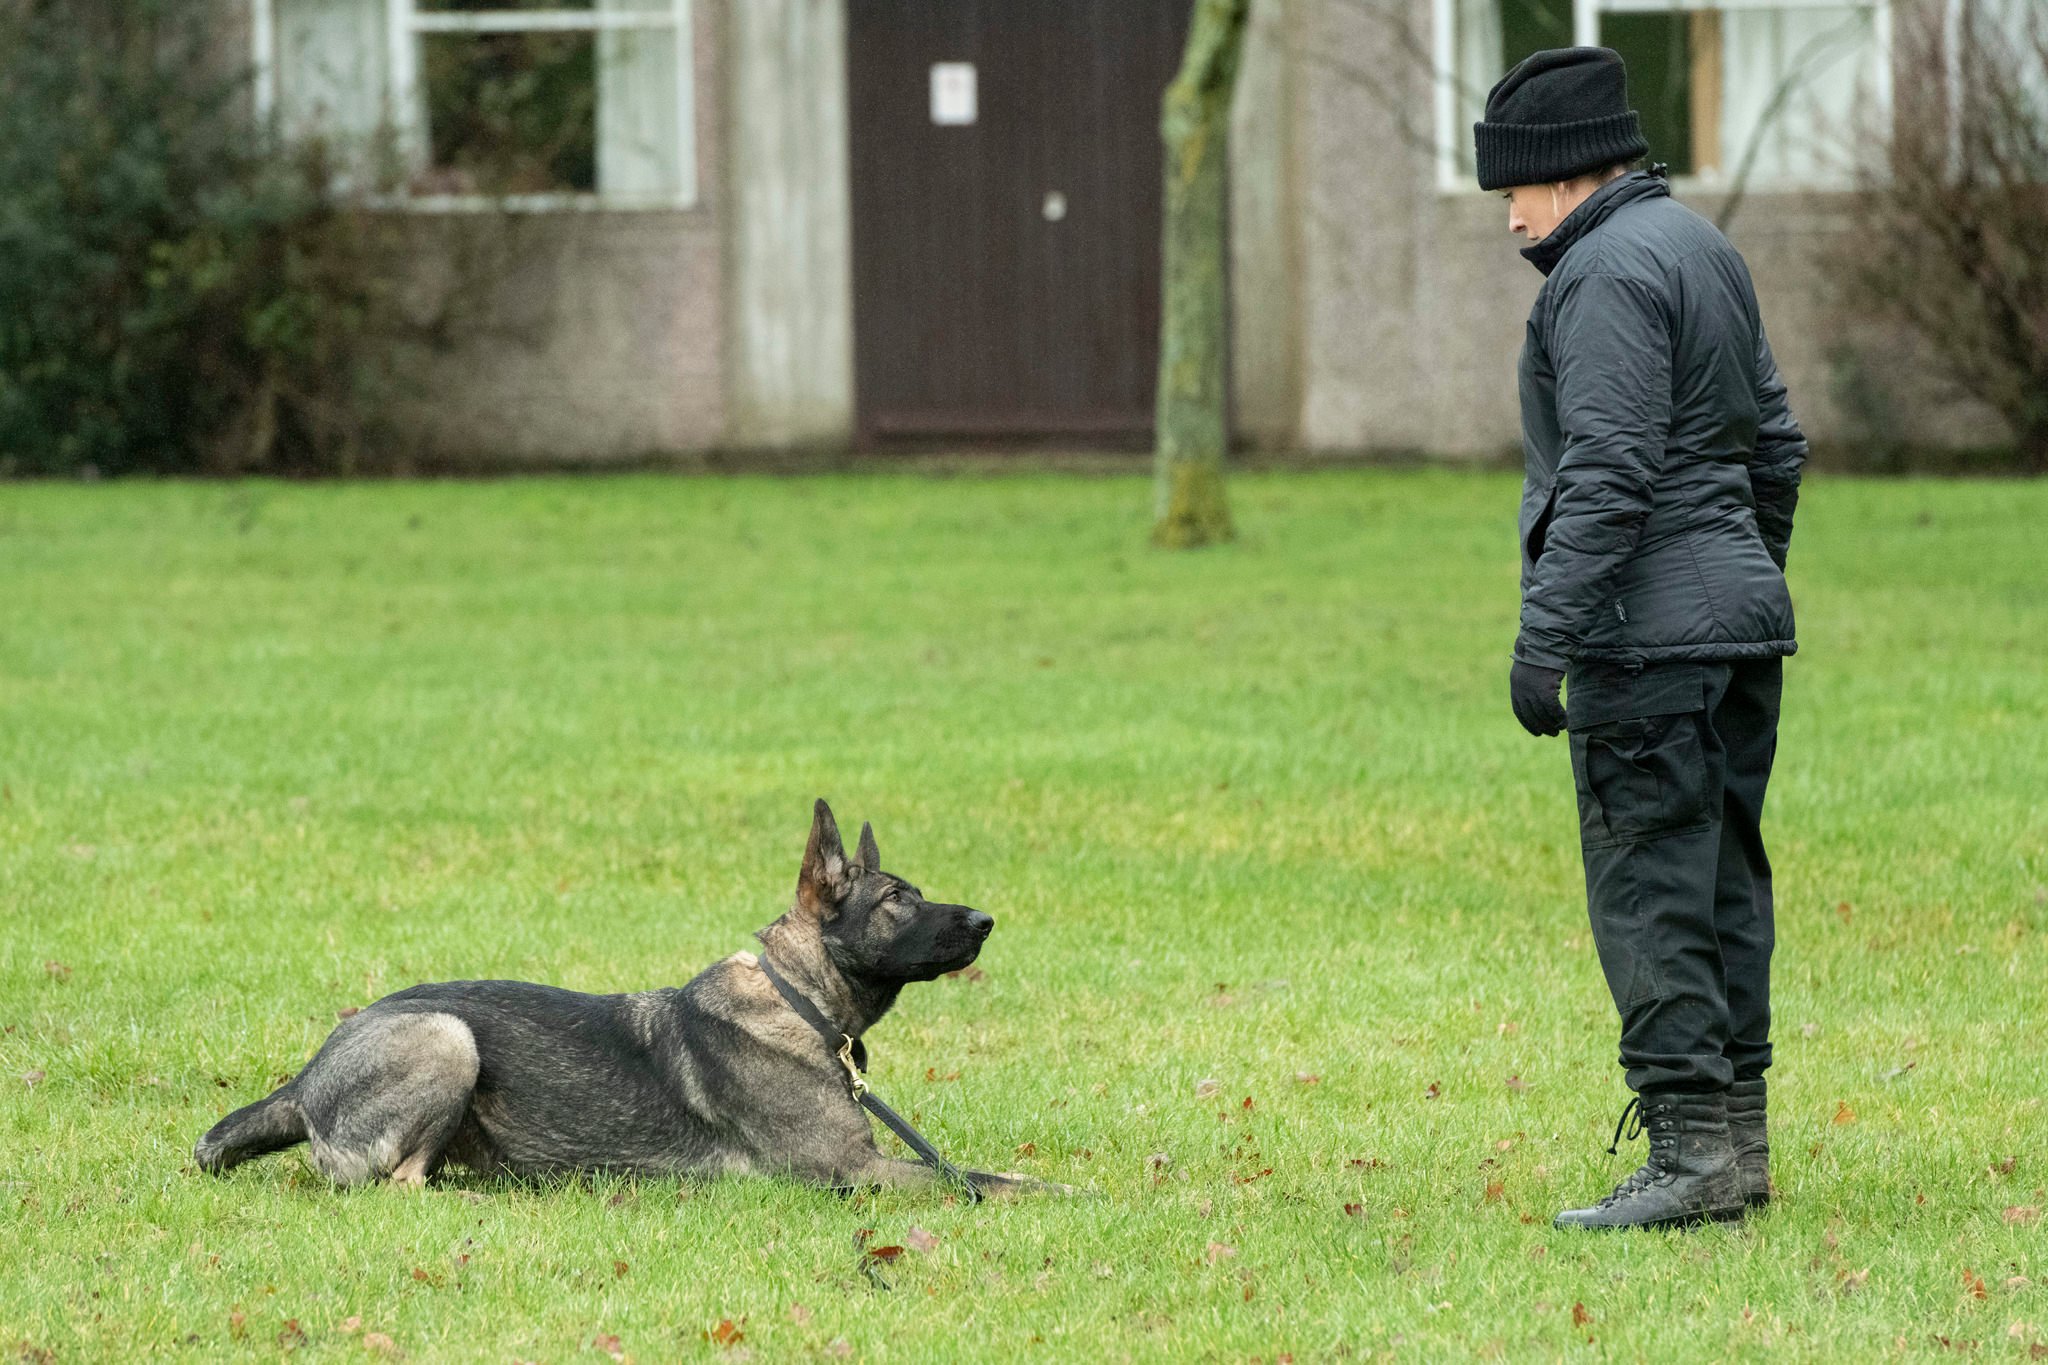 Police dog Cody working with his handler.